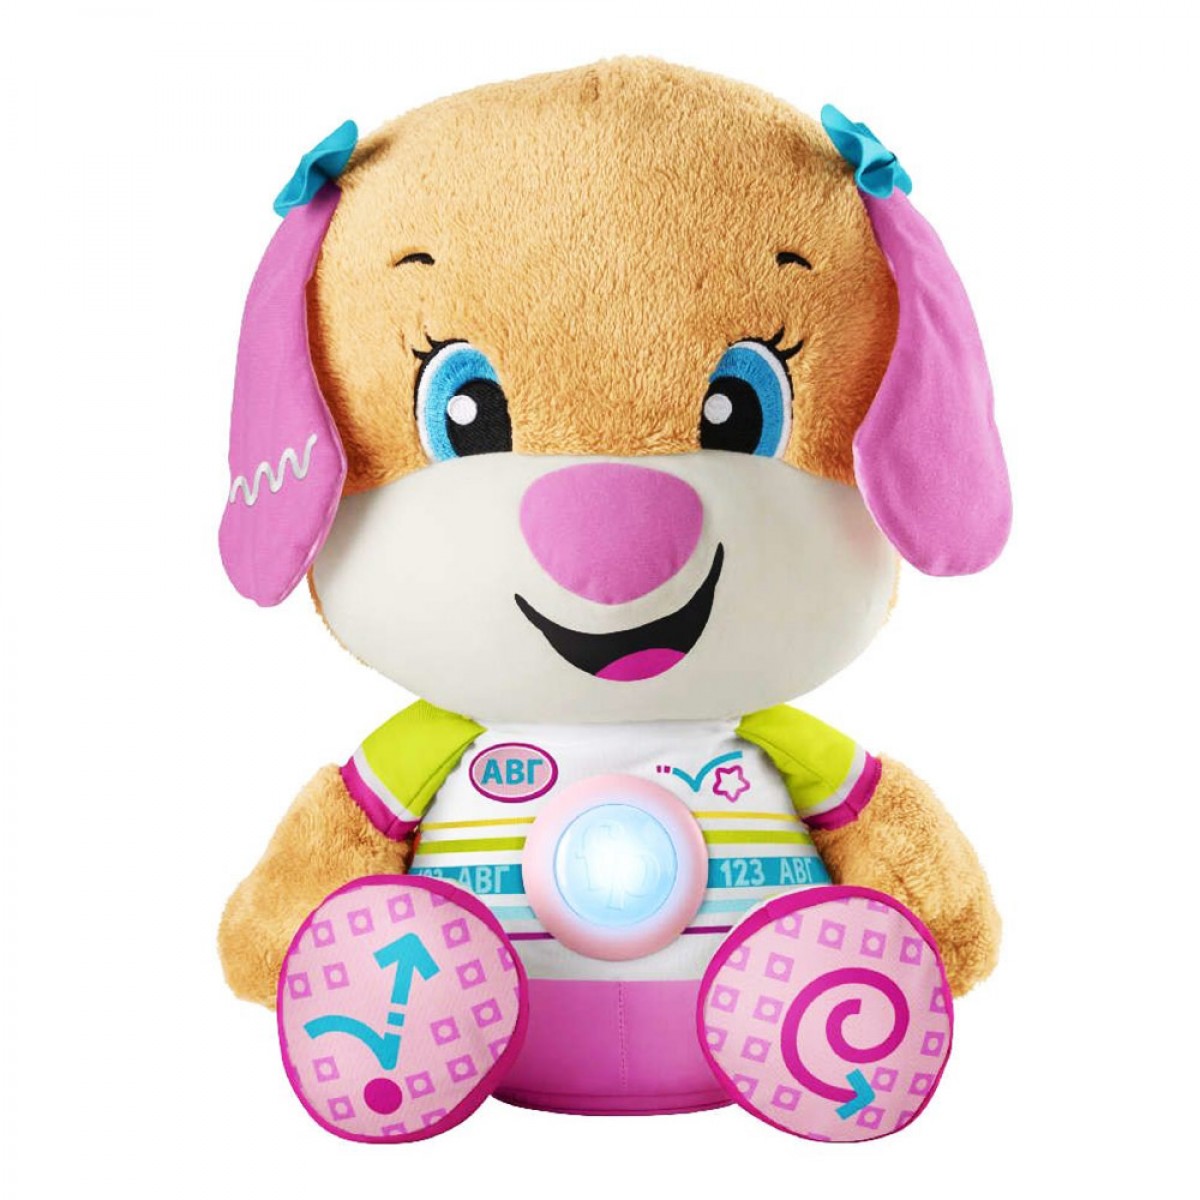 FISHER PRICE ΜΑΛΑΚΟ ΣΚΥΛΑΚΙ SMART HCJ38